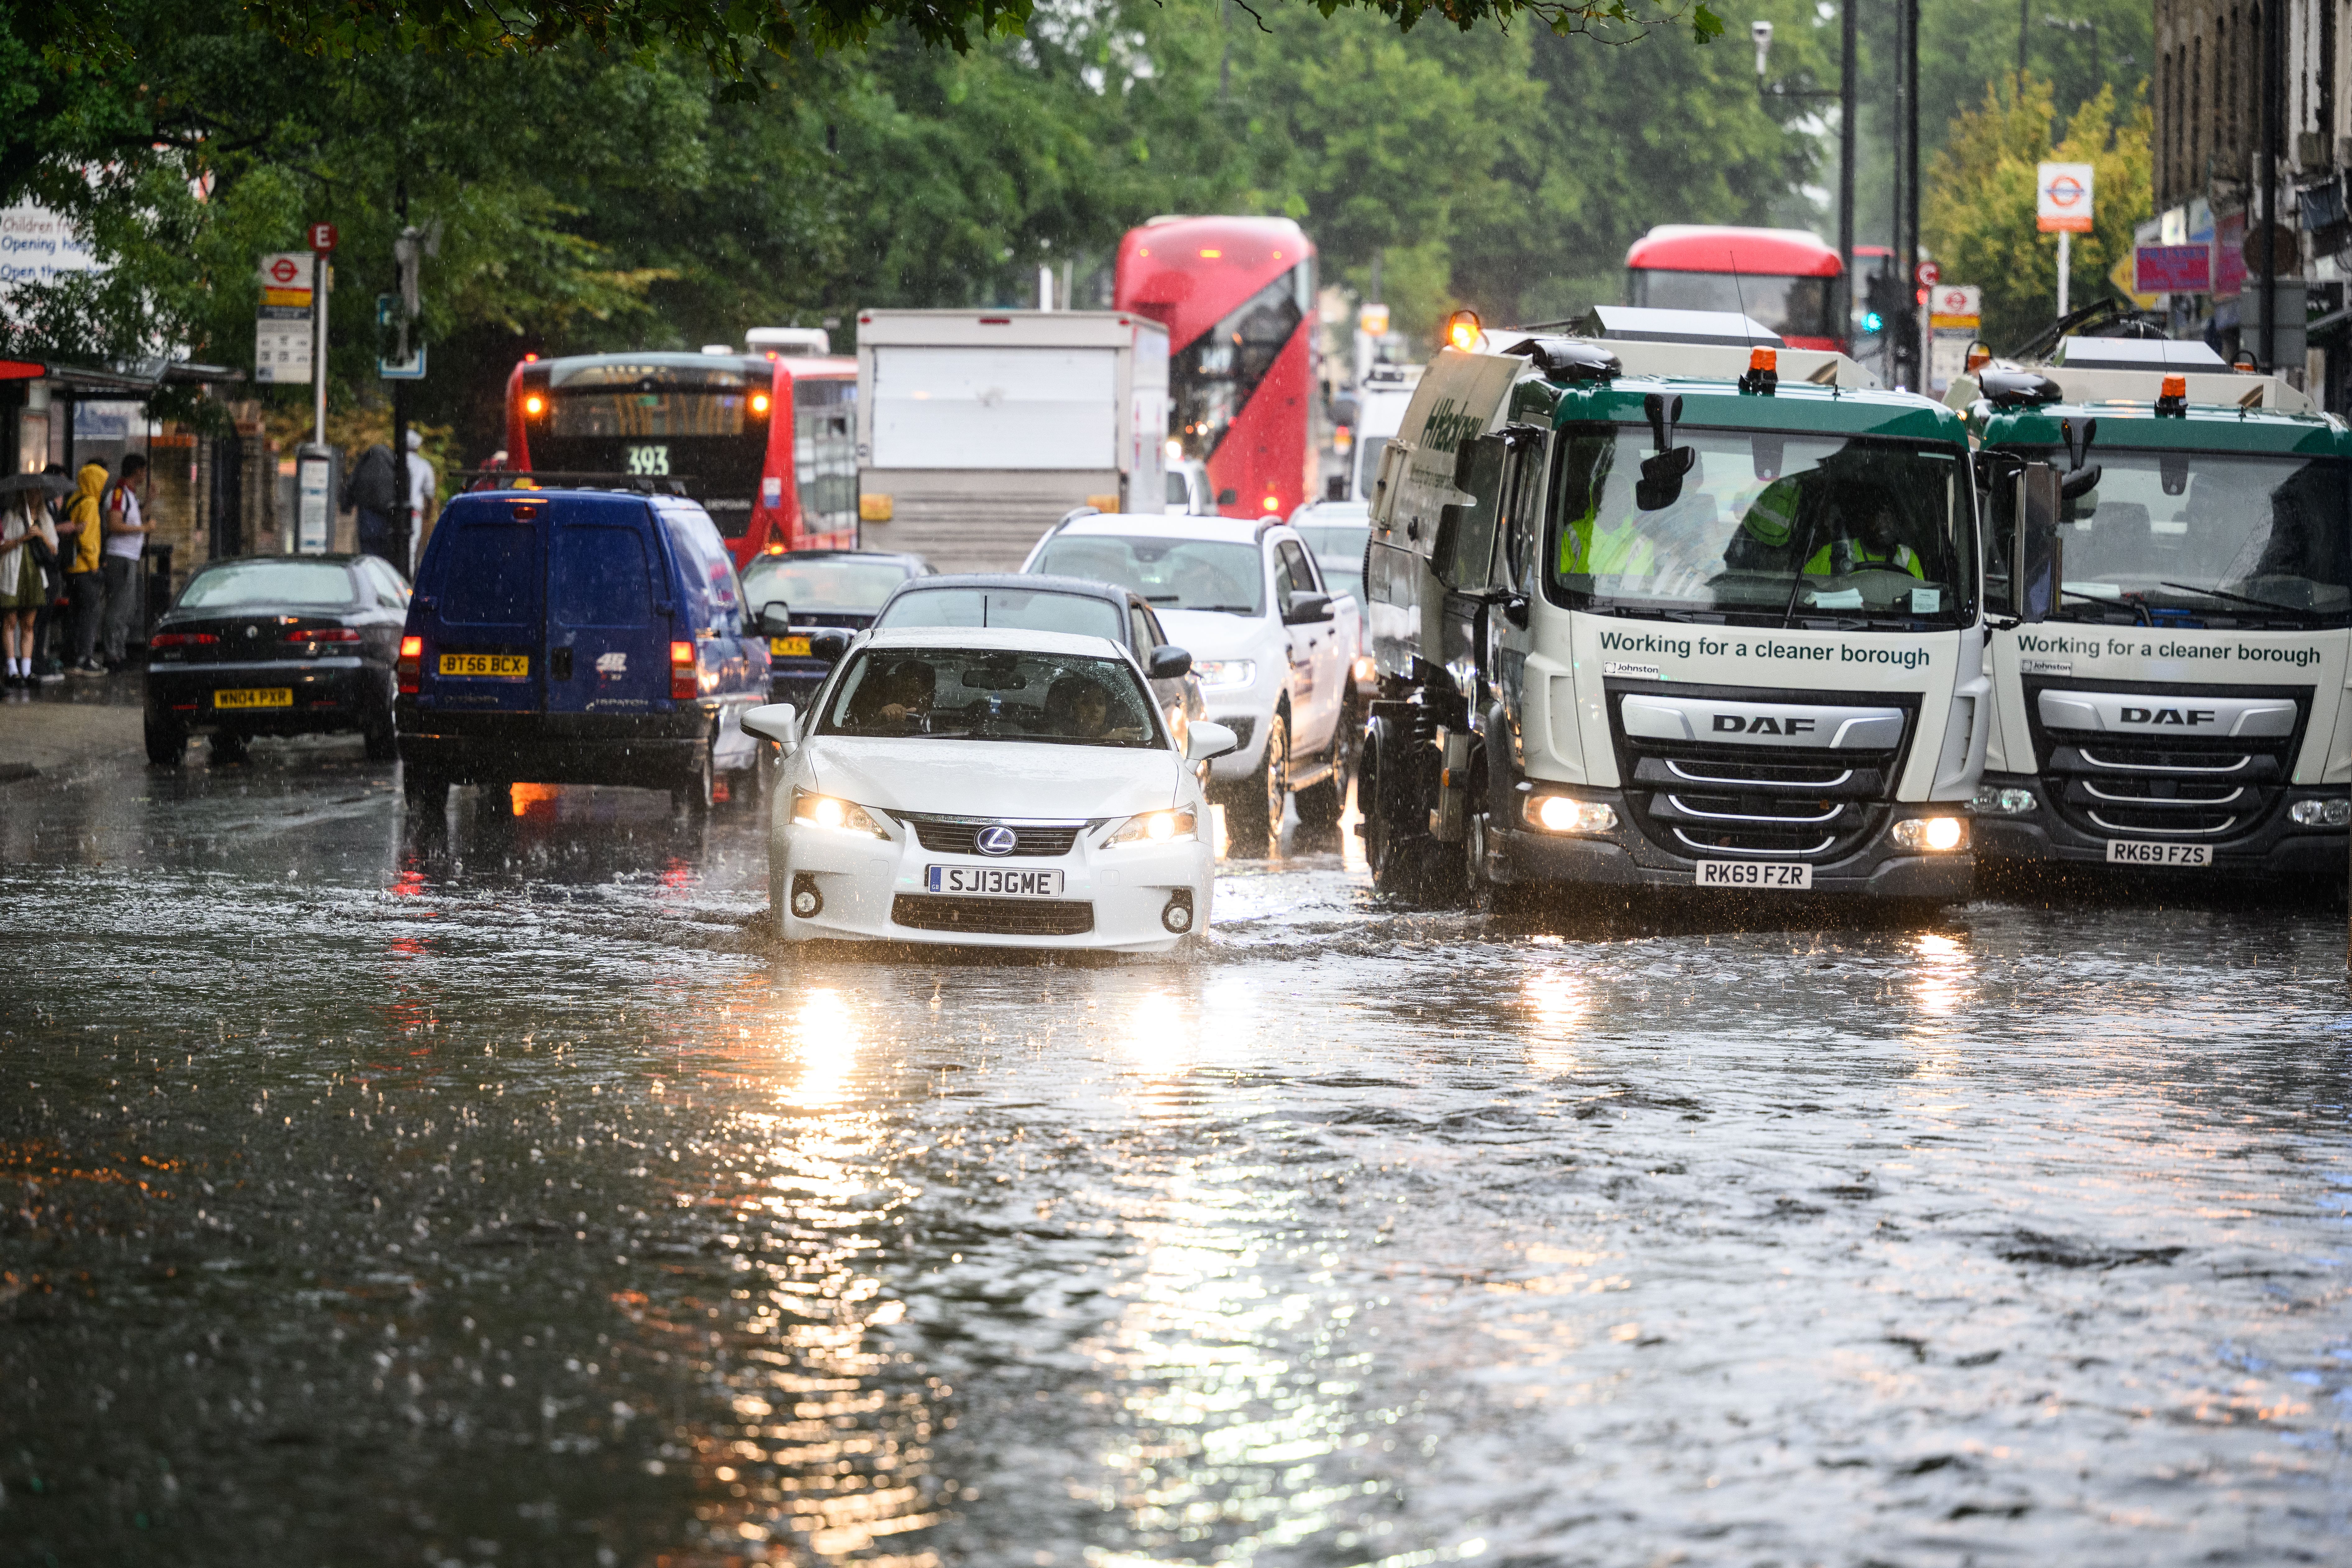  A car negotiates a flooded section of road, as torrential rain and thunderstorms hit the country on August 17, 2022 in London, England. 